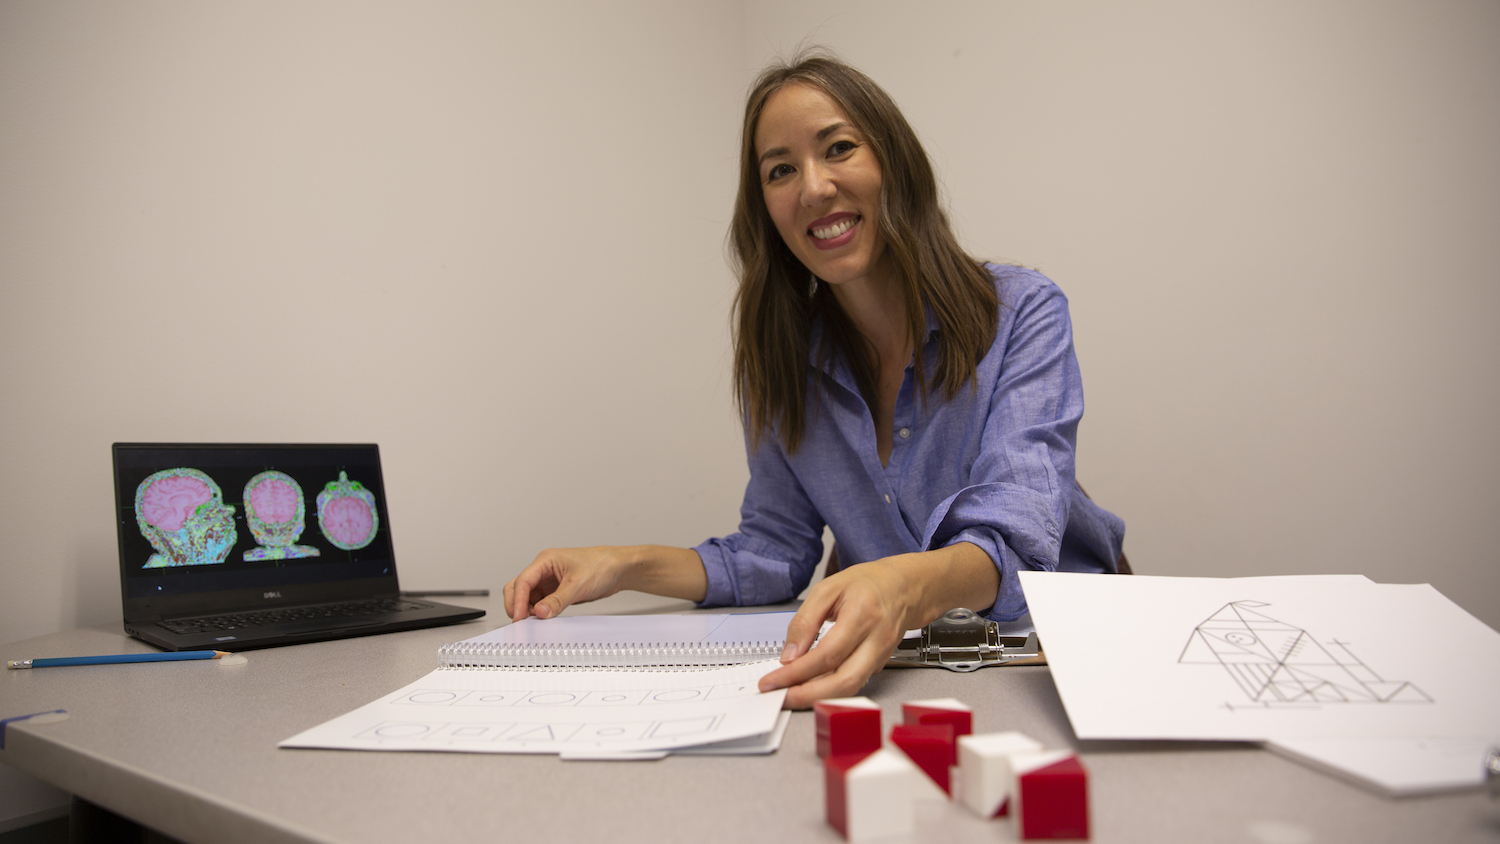 Sydney Schaefer sits at her desk displaying some of the low-cost cognitive tests (papers with drawings) she uses in her research